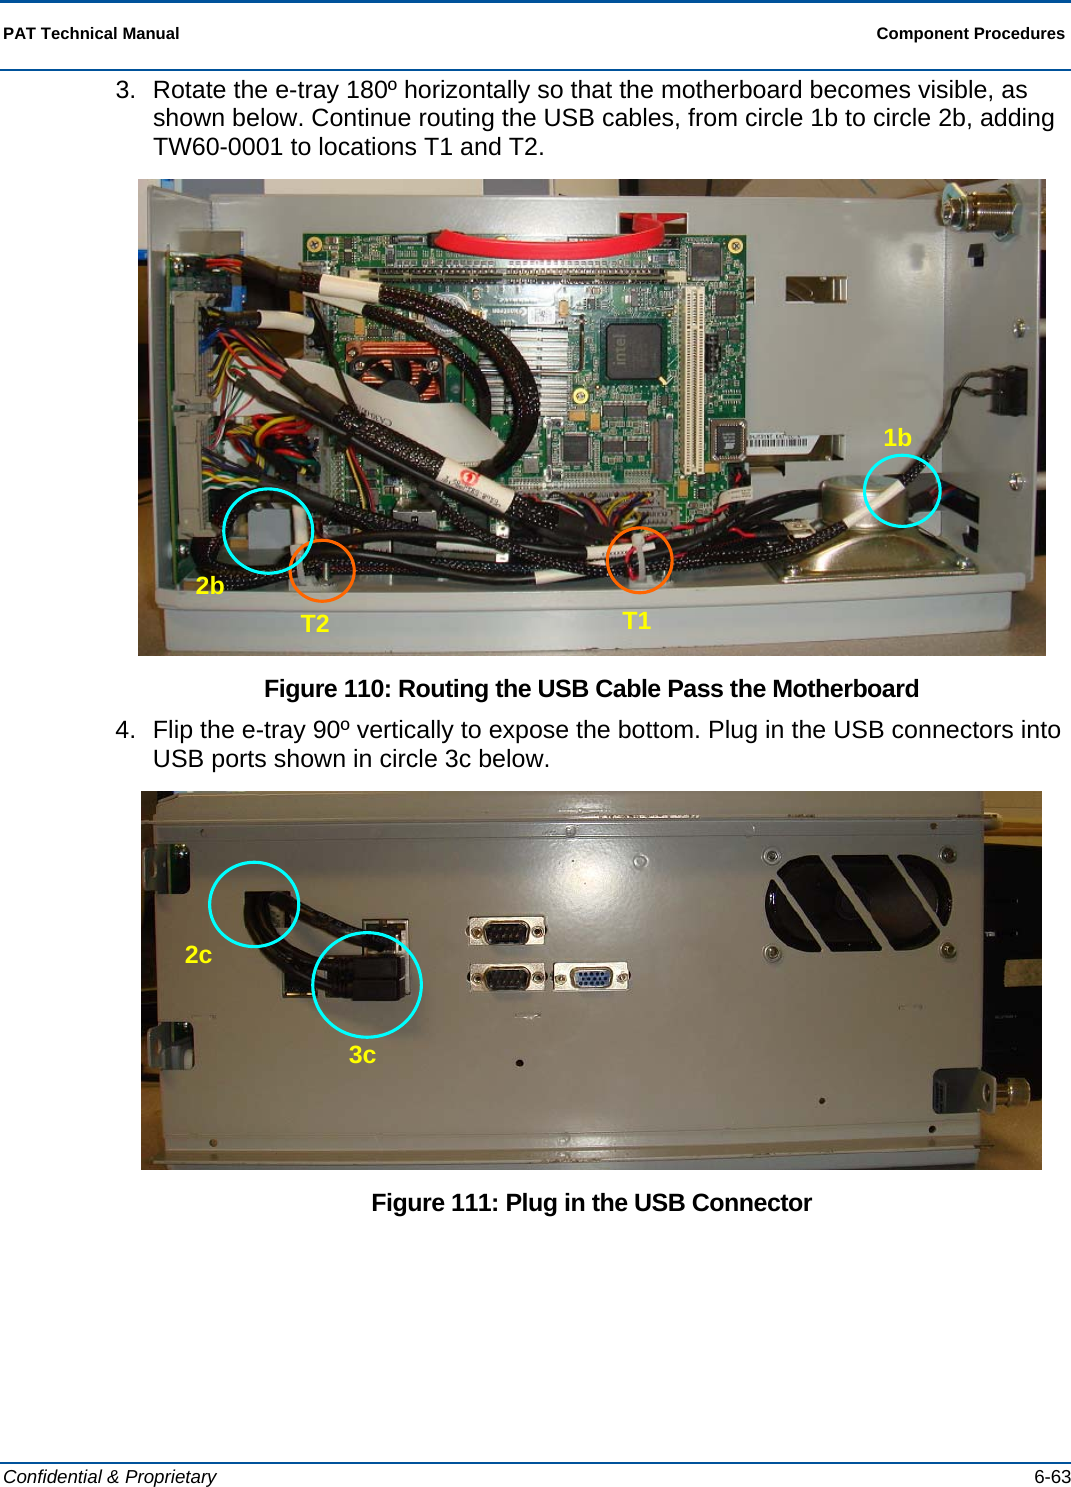  PAT Technical Manual  Component Procedures  Confidential &amp; Proprietary   6-63 3.  Rotate the e-tray 180º horizontally so that the motherboard becomes visible, as shown below. Continue routing the USB cables, from circle 1b to circle 2b, adding TW60-0001 to locations T1 and T2.  Figure 110: Routing the USB Cable Pass the Motherboard 4.  Flip the e-tray 90º vertically to expose the bottom. Plug in the USB connectors into USB ports shown in circle 3c below.  Figure 111: Plug in the USB Connector 2b T2  T1 1b 2c 3c 